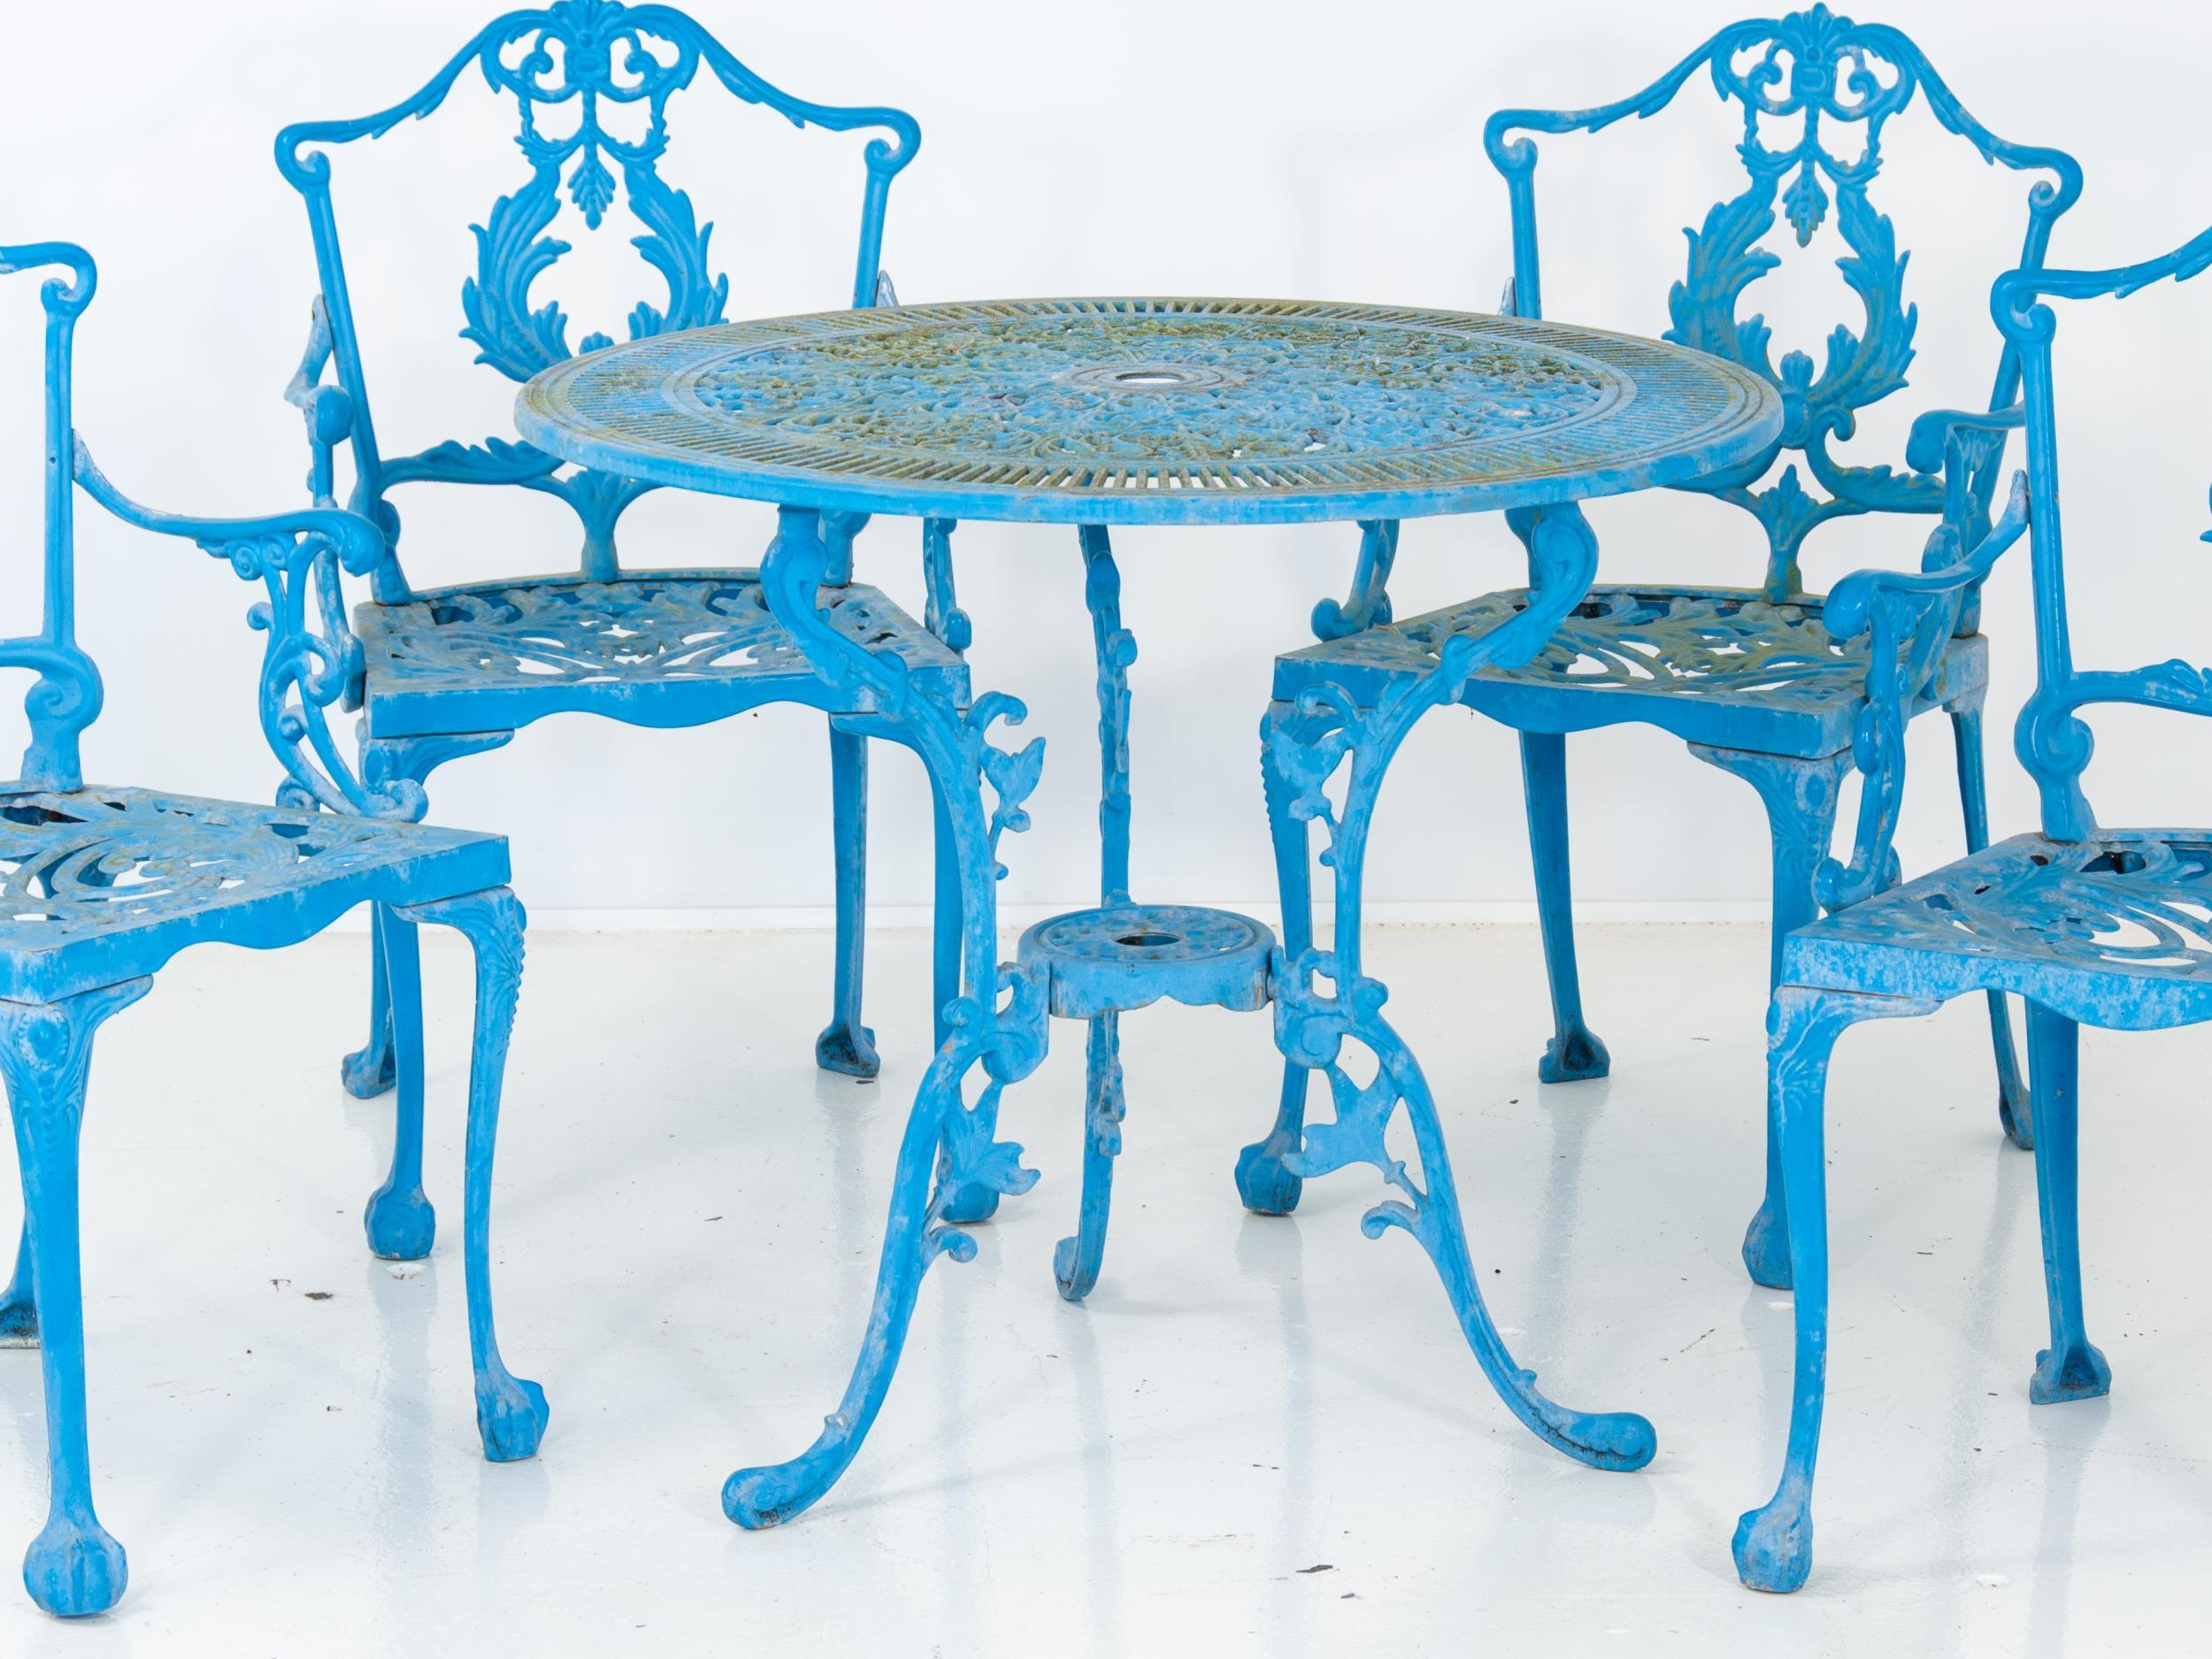 A Victorian style English garden dining table and four armchairs with an acanthus motif. A bright and beautiful blue color finished the table and chairs made of cast metal alloy. Mid 20th century. Measurements are as follows:
Table diameter-